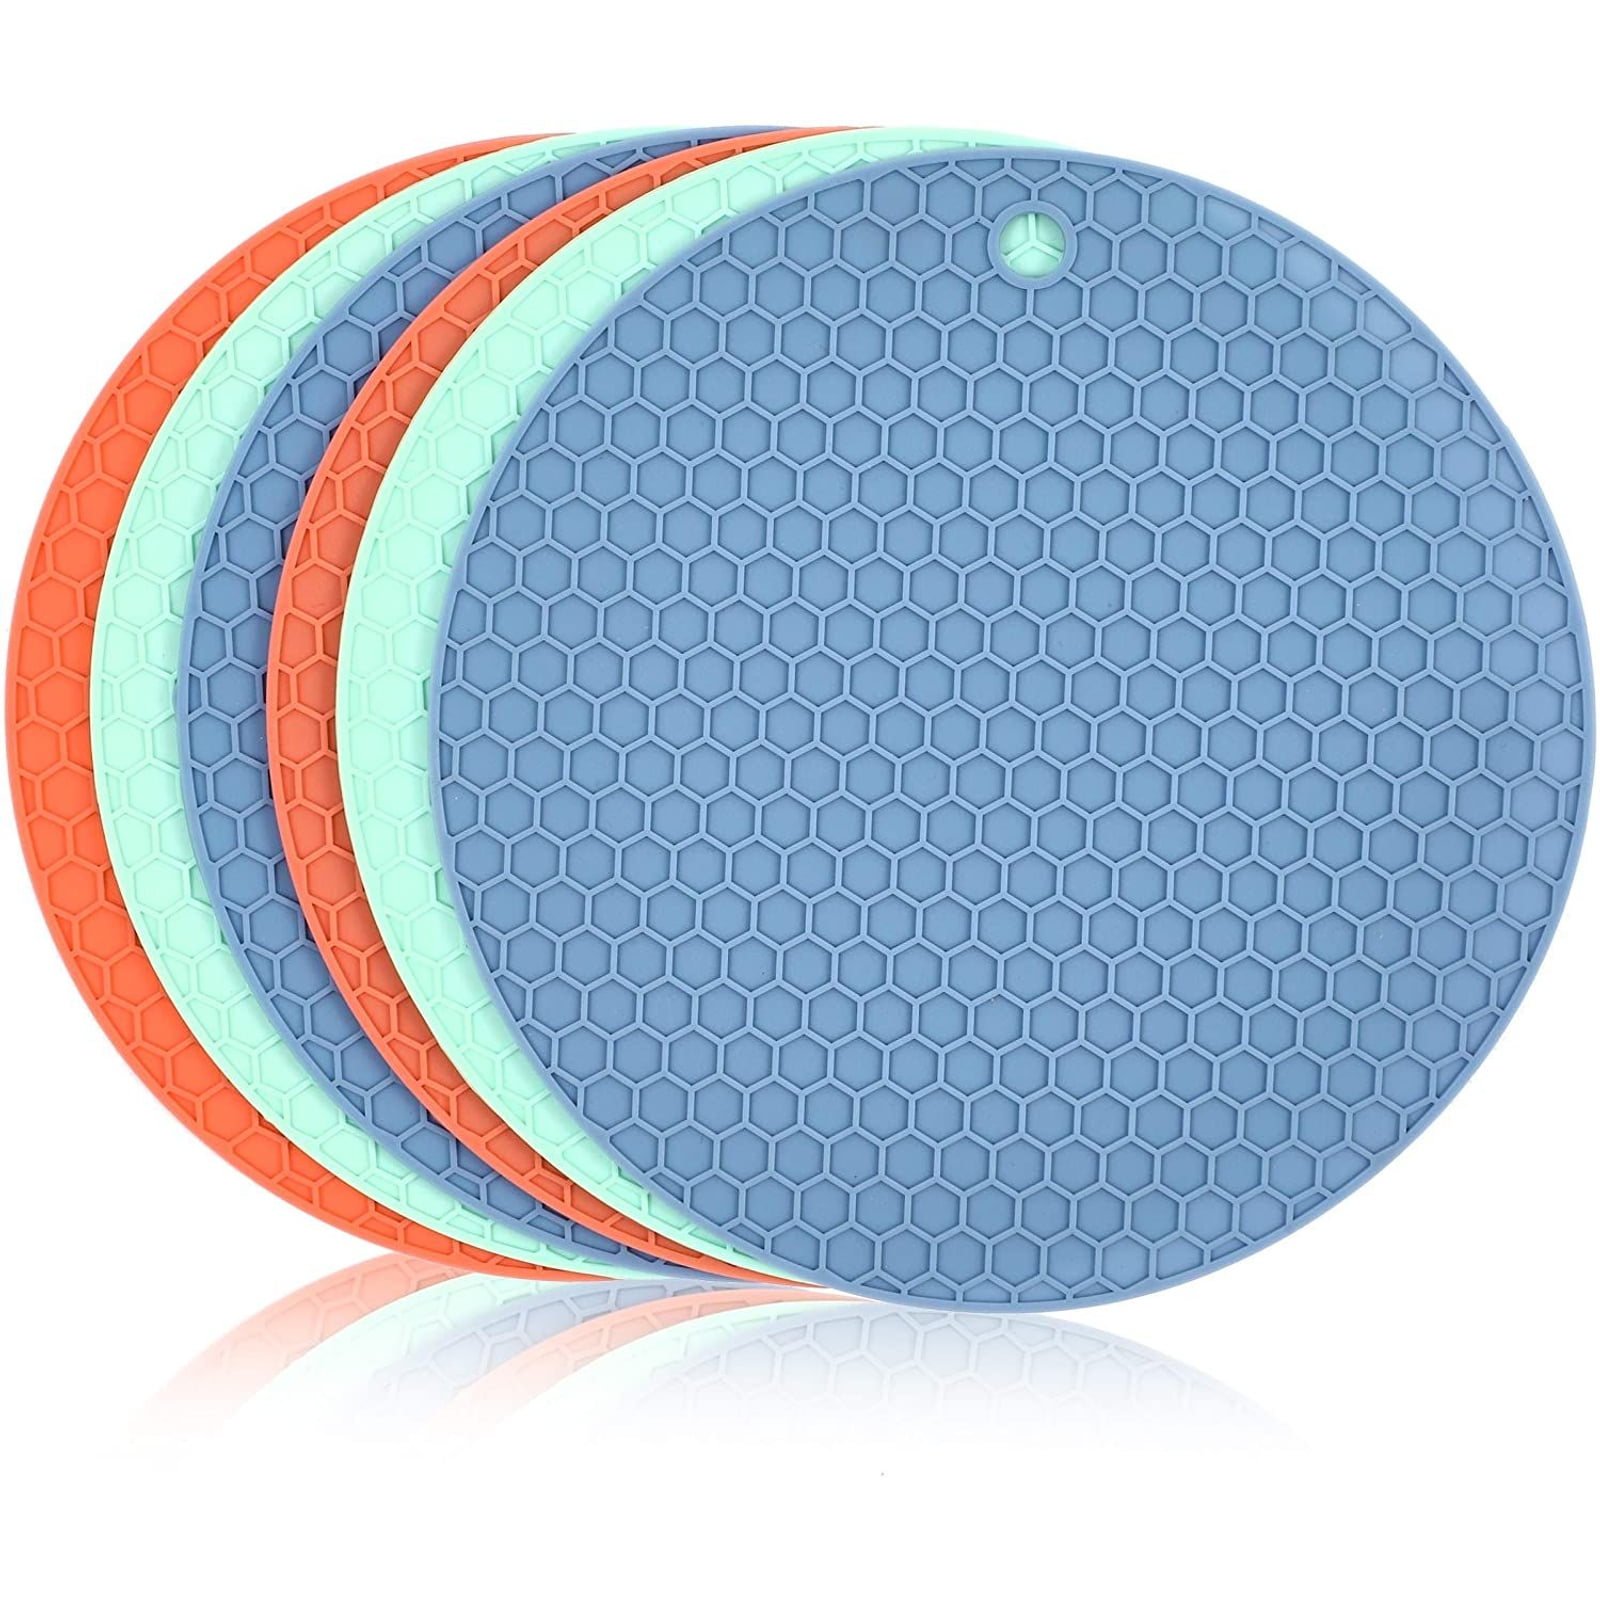 Blue LINVINC 7inch Round Silicone Trivet Heat Proof Mat Home Kitchen Hot Dishes Heat Resistant Hot Pad Pot Holder Coaster Pan Mat 18x18x0.8cm 